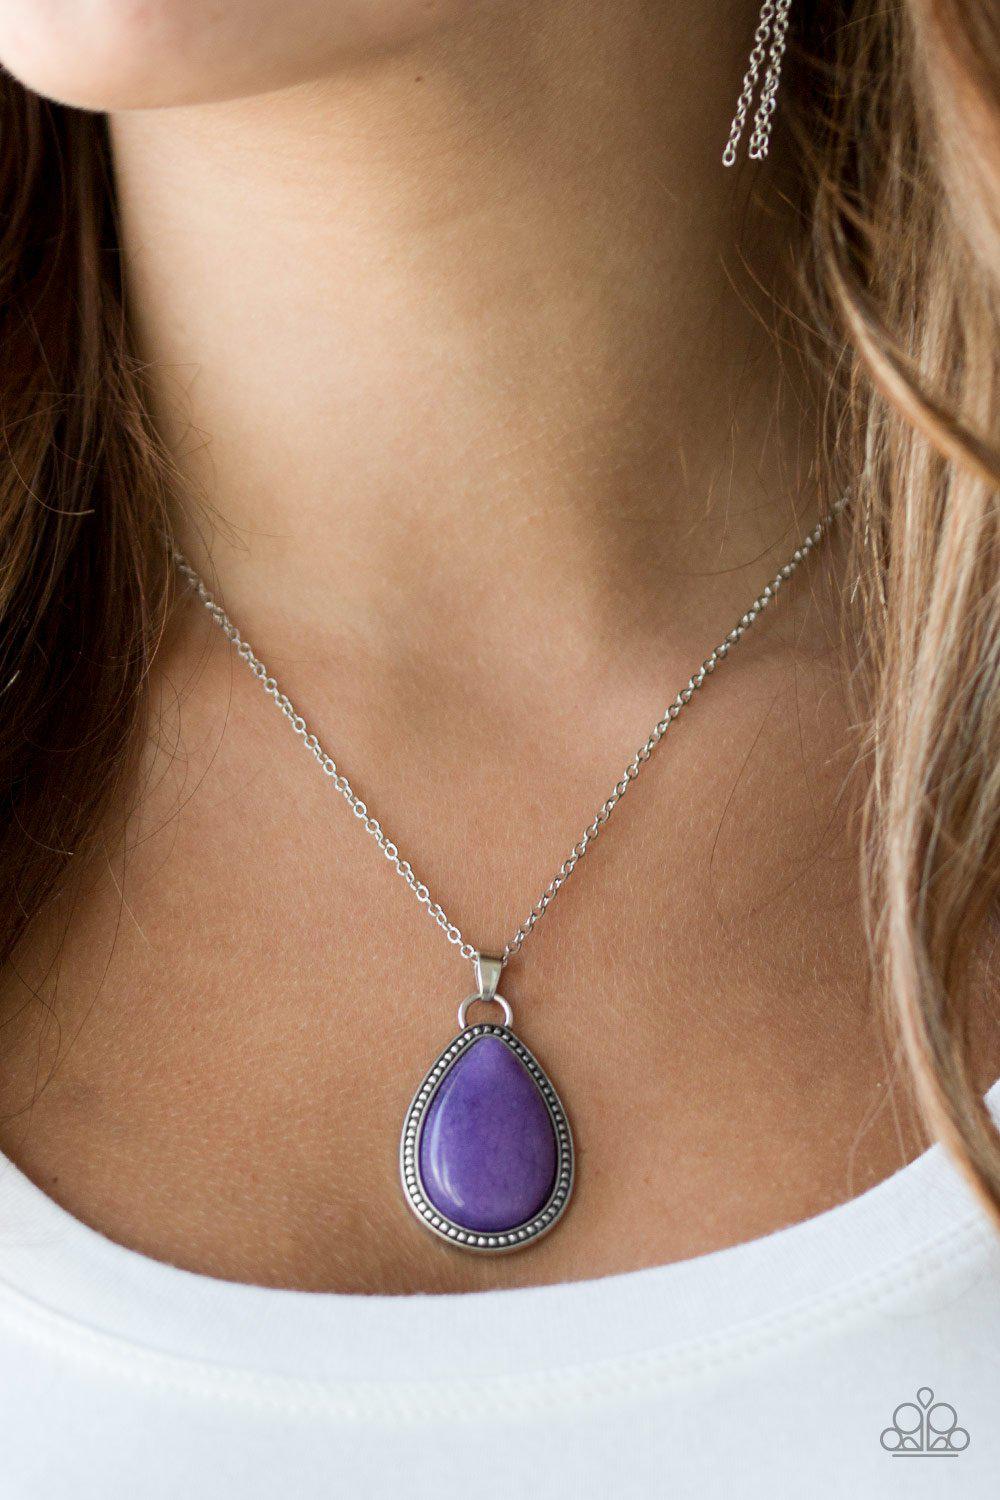 On The Home FRONTIER Purple Stone Teardrop Necklace - Paparazzi Accessories-CarasShop.com - $5 Jewelry by Cara Jewels